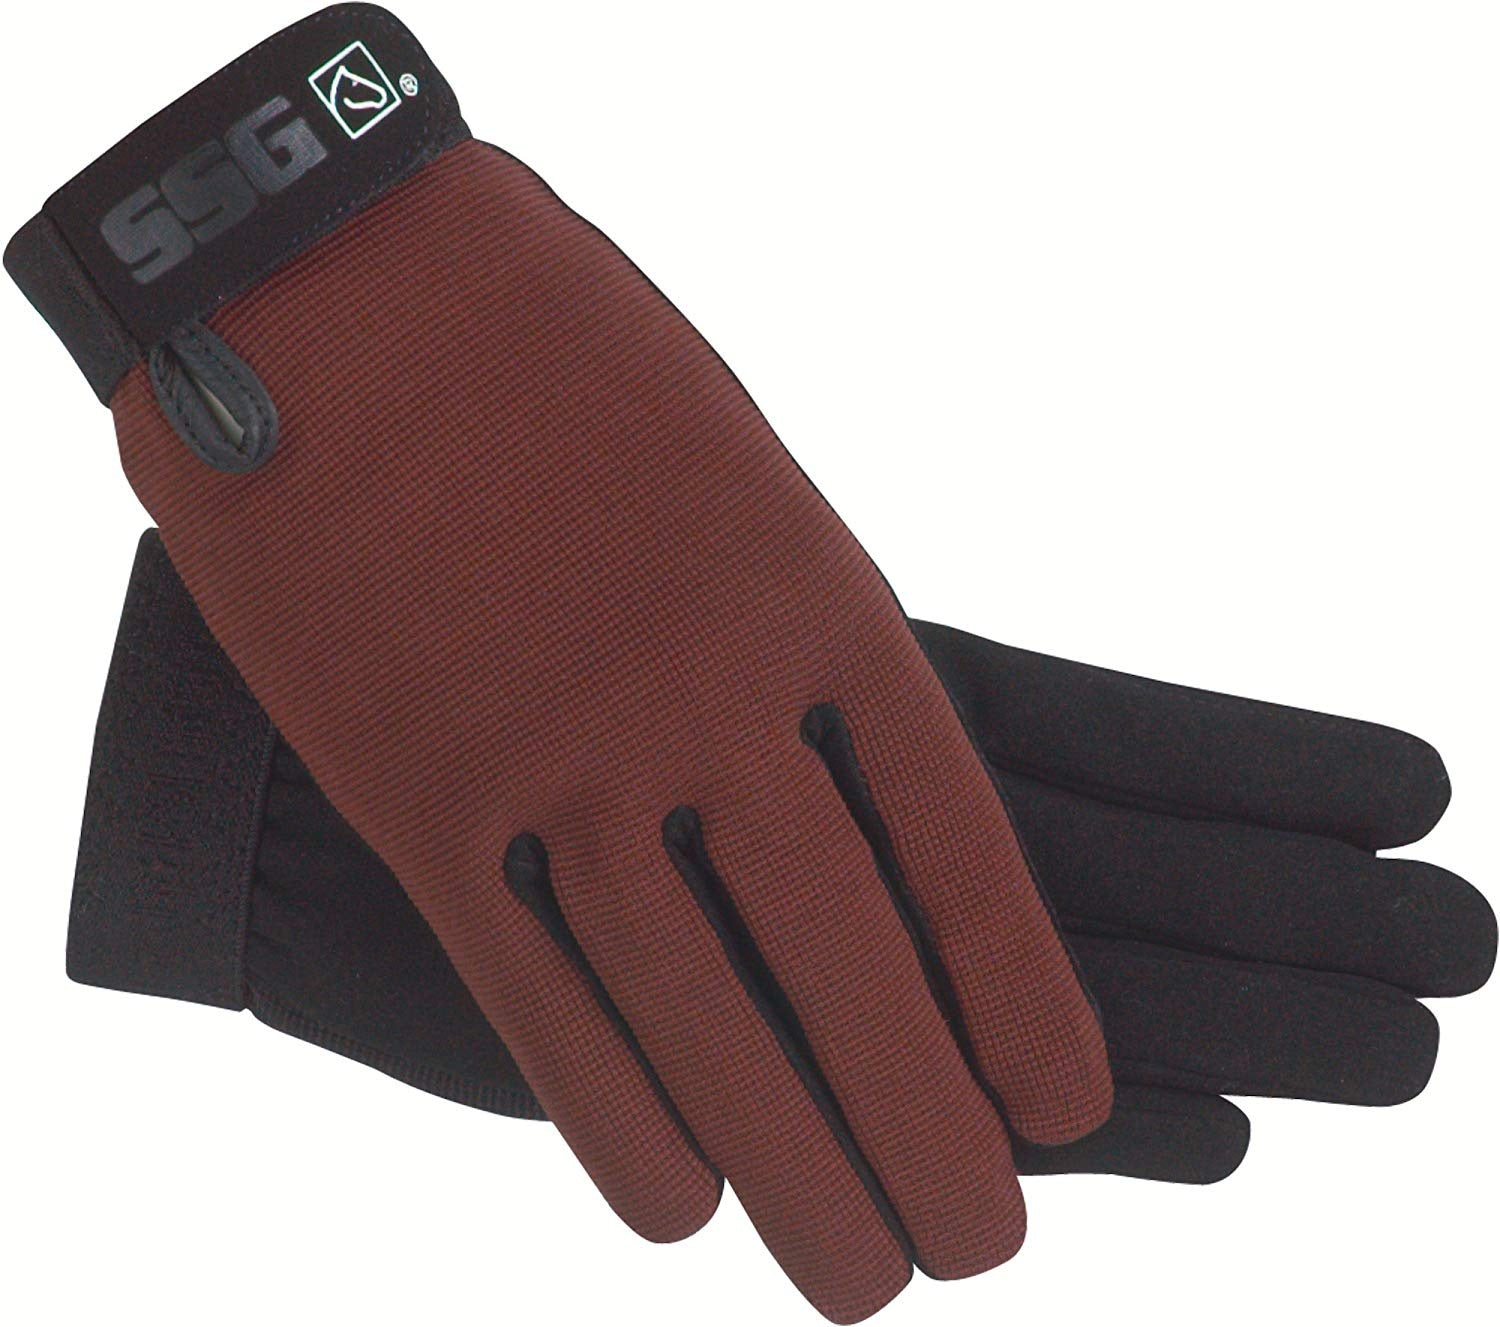 SSG All Weather Gloves - Incl Kids